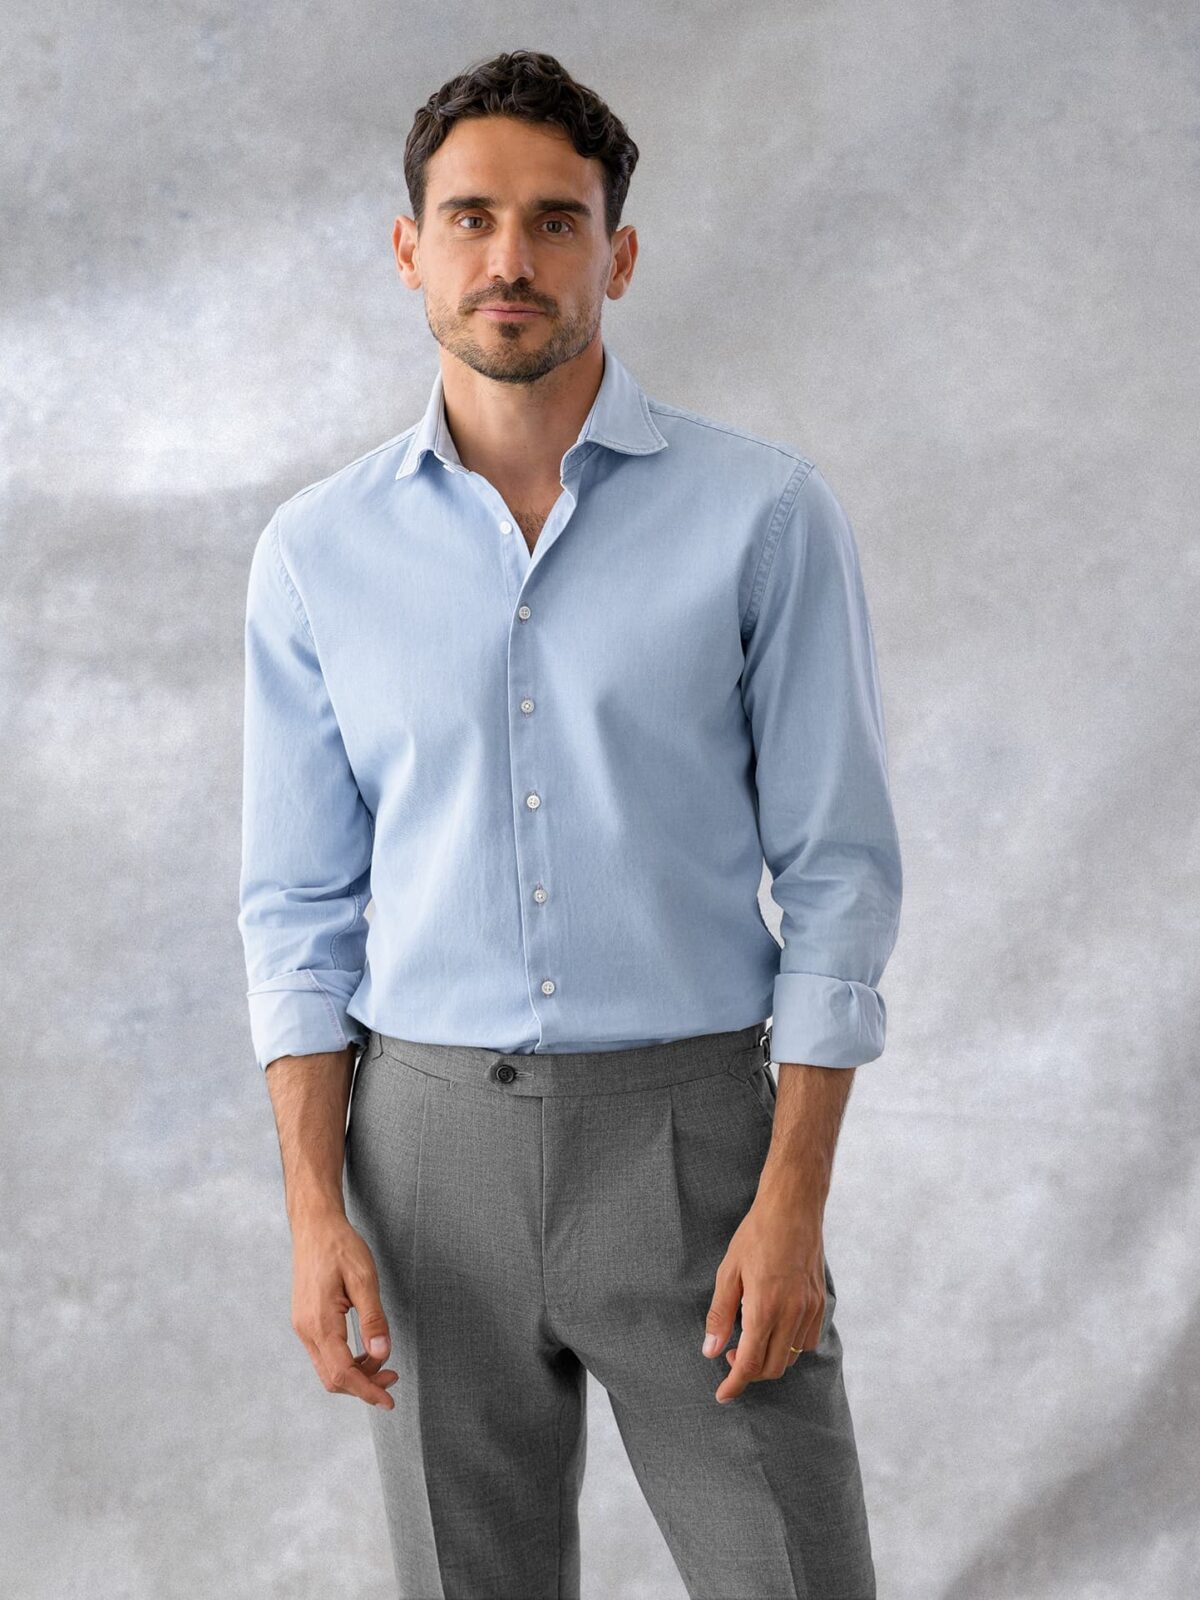 What Color Pants Go With a Grey Shirt  Bellatory